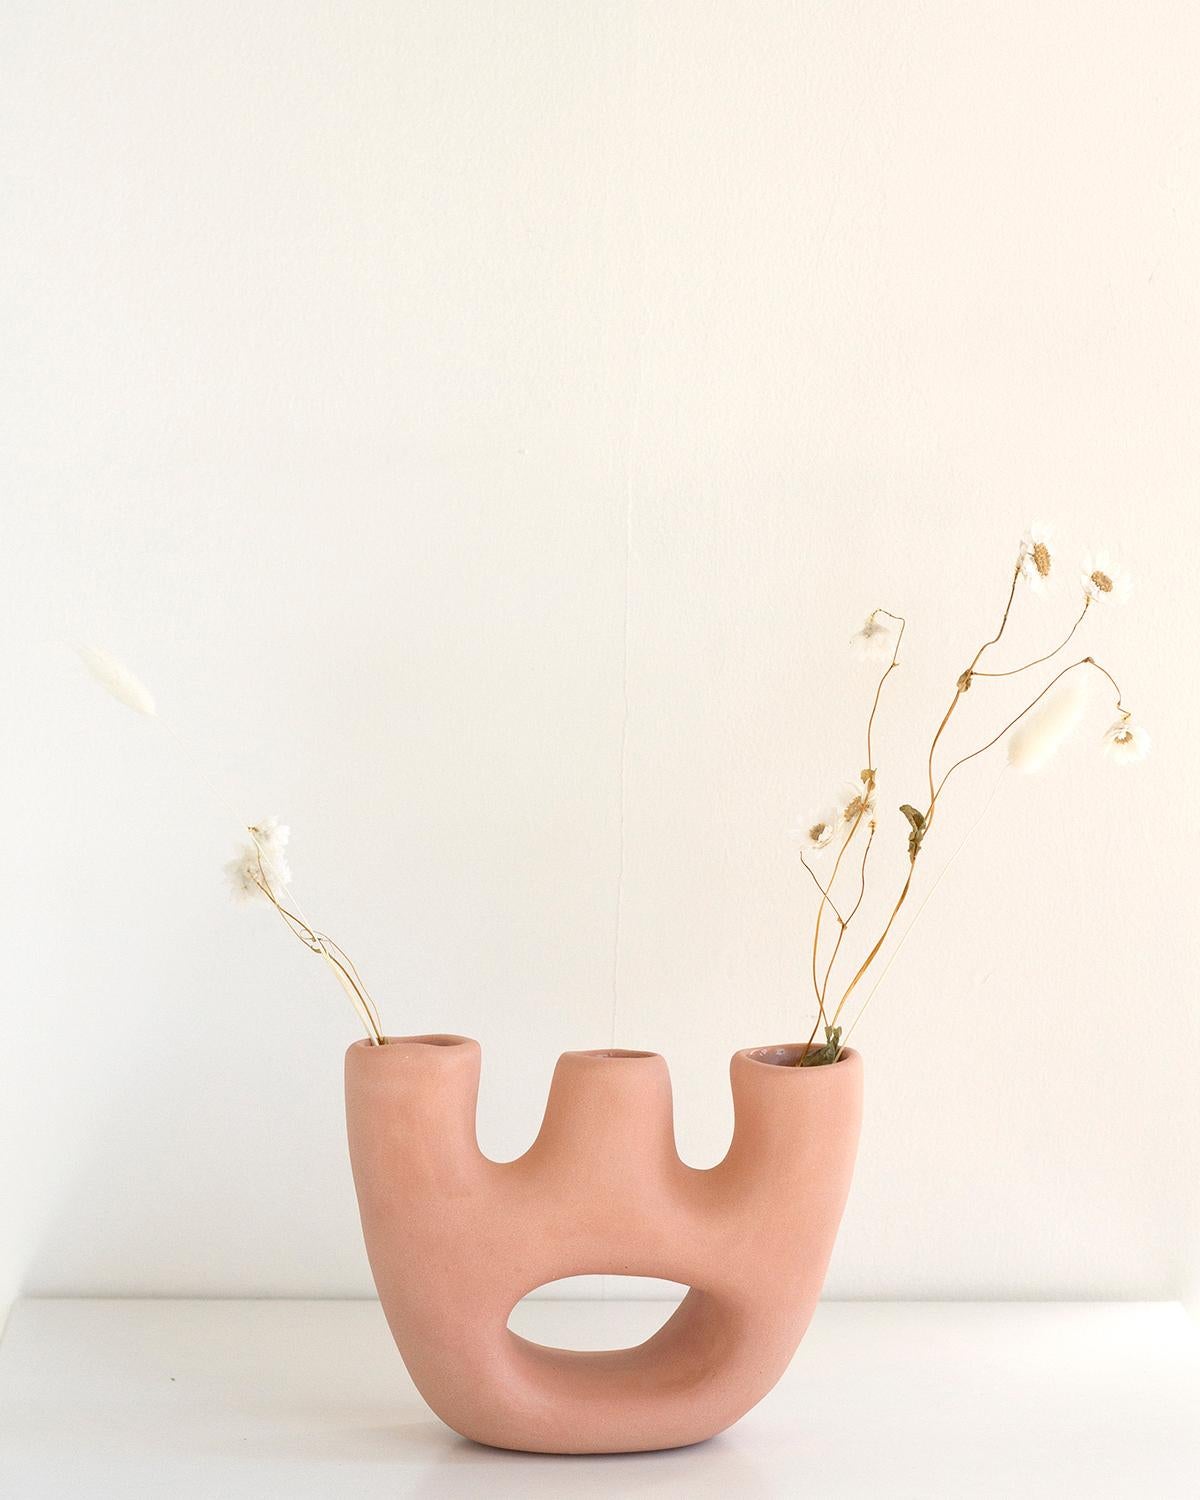 Adorn your home with this unique handmade ceramic vase. Crafted with clay and finished with a luxurious special edition pink matte glaze, its minimalist design features rustic aesthetics combined with organic modern elements. Elevate your home decor